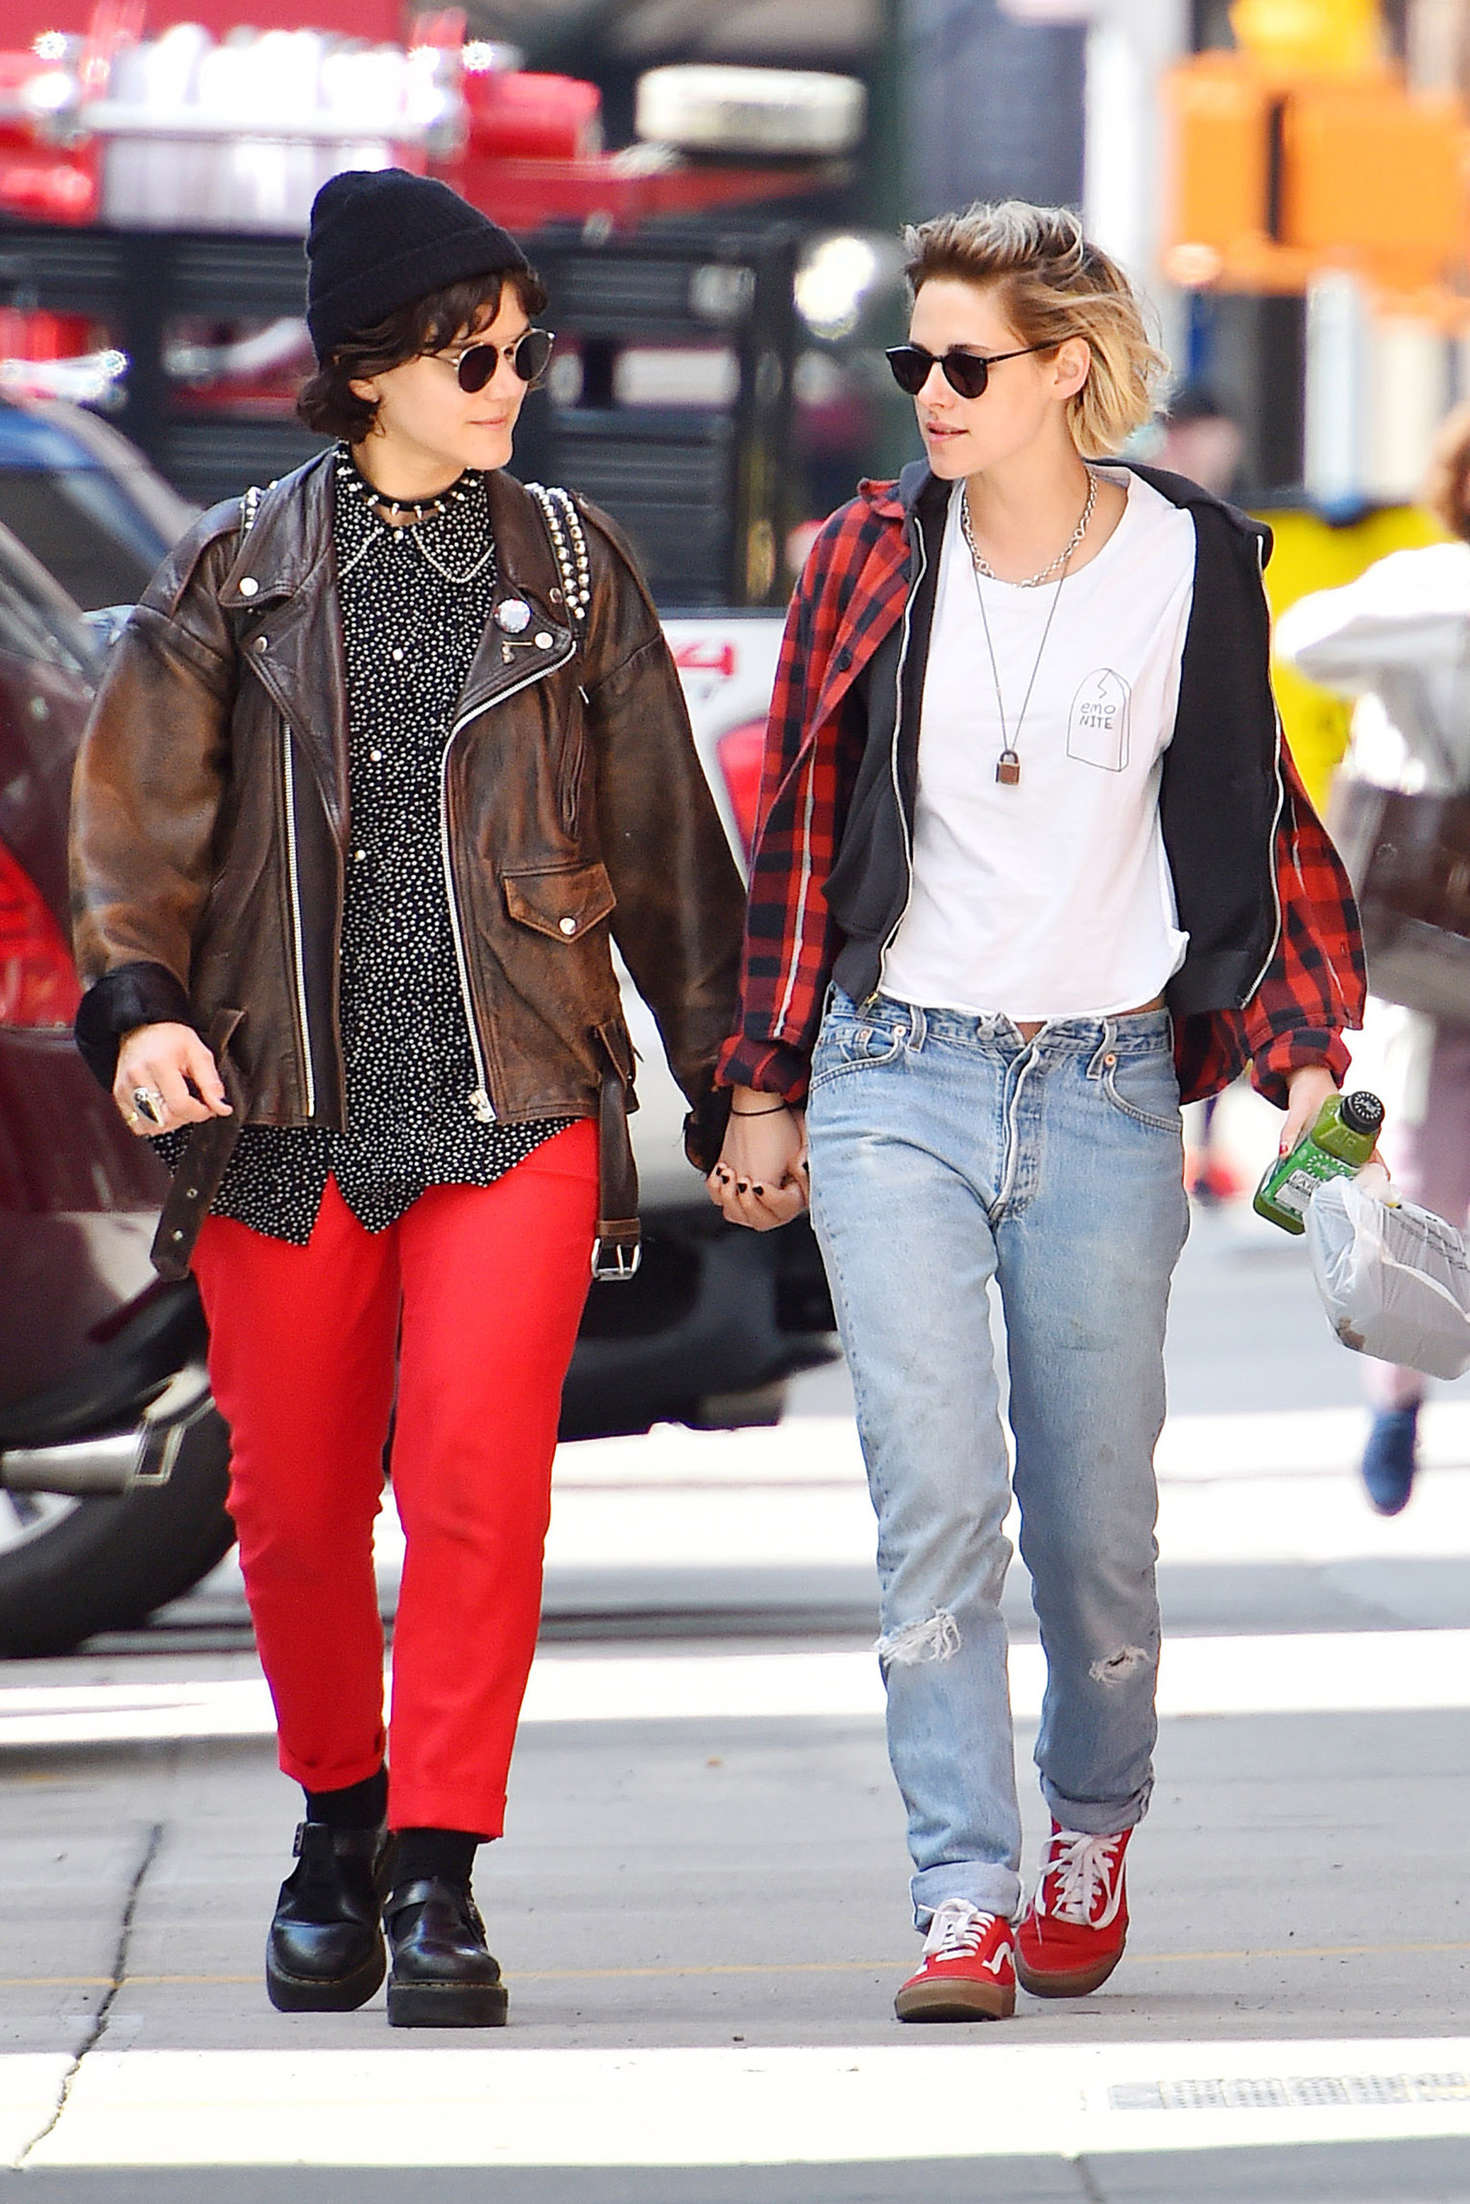 Kristen Stewart and SoKo Out in New York City